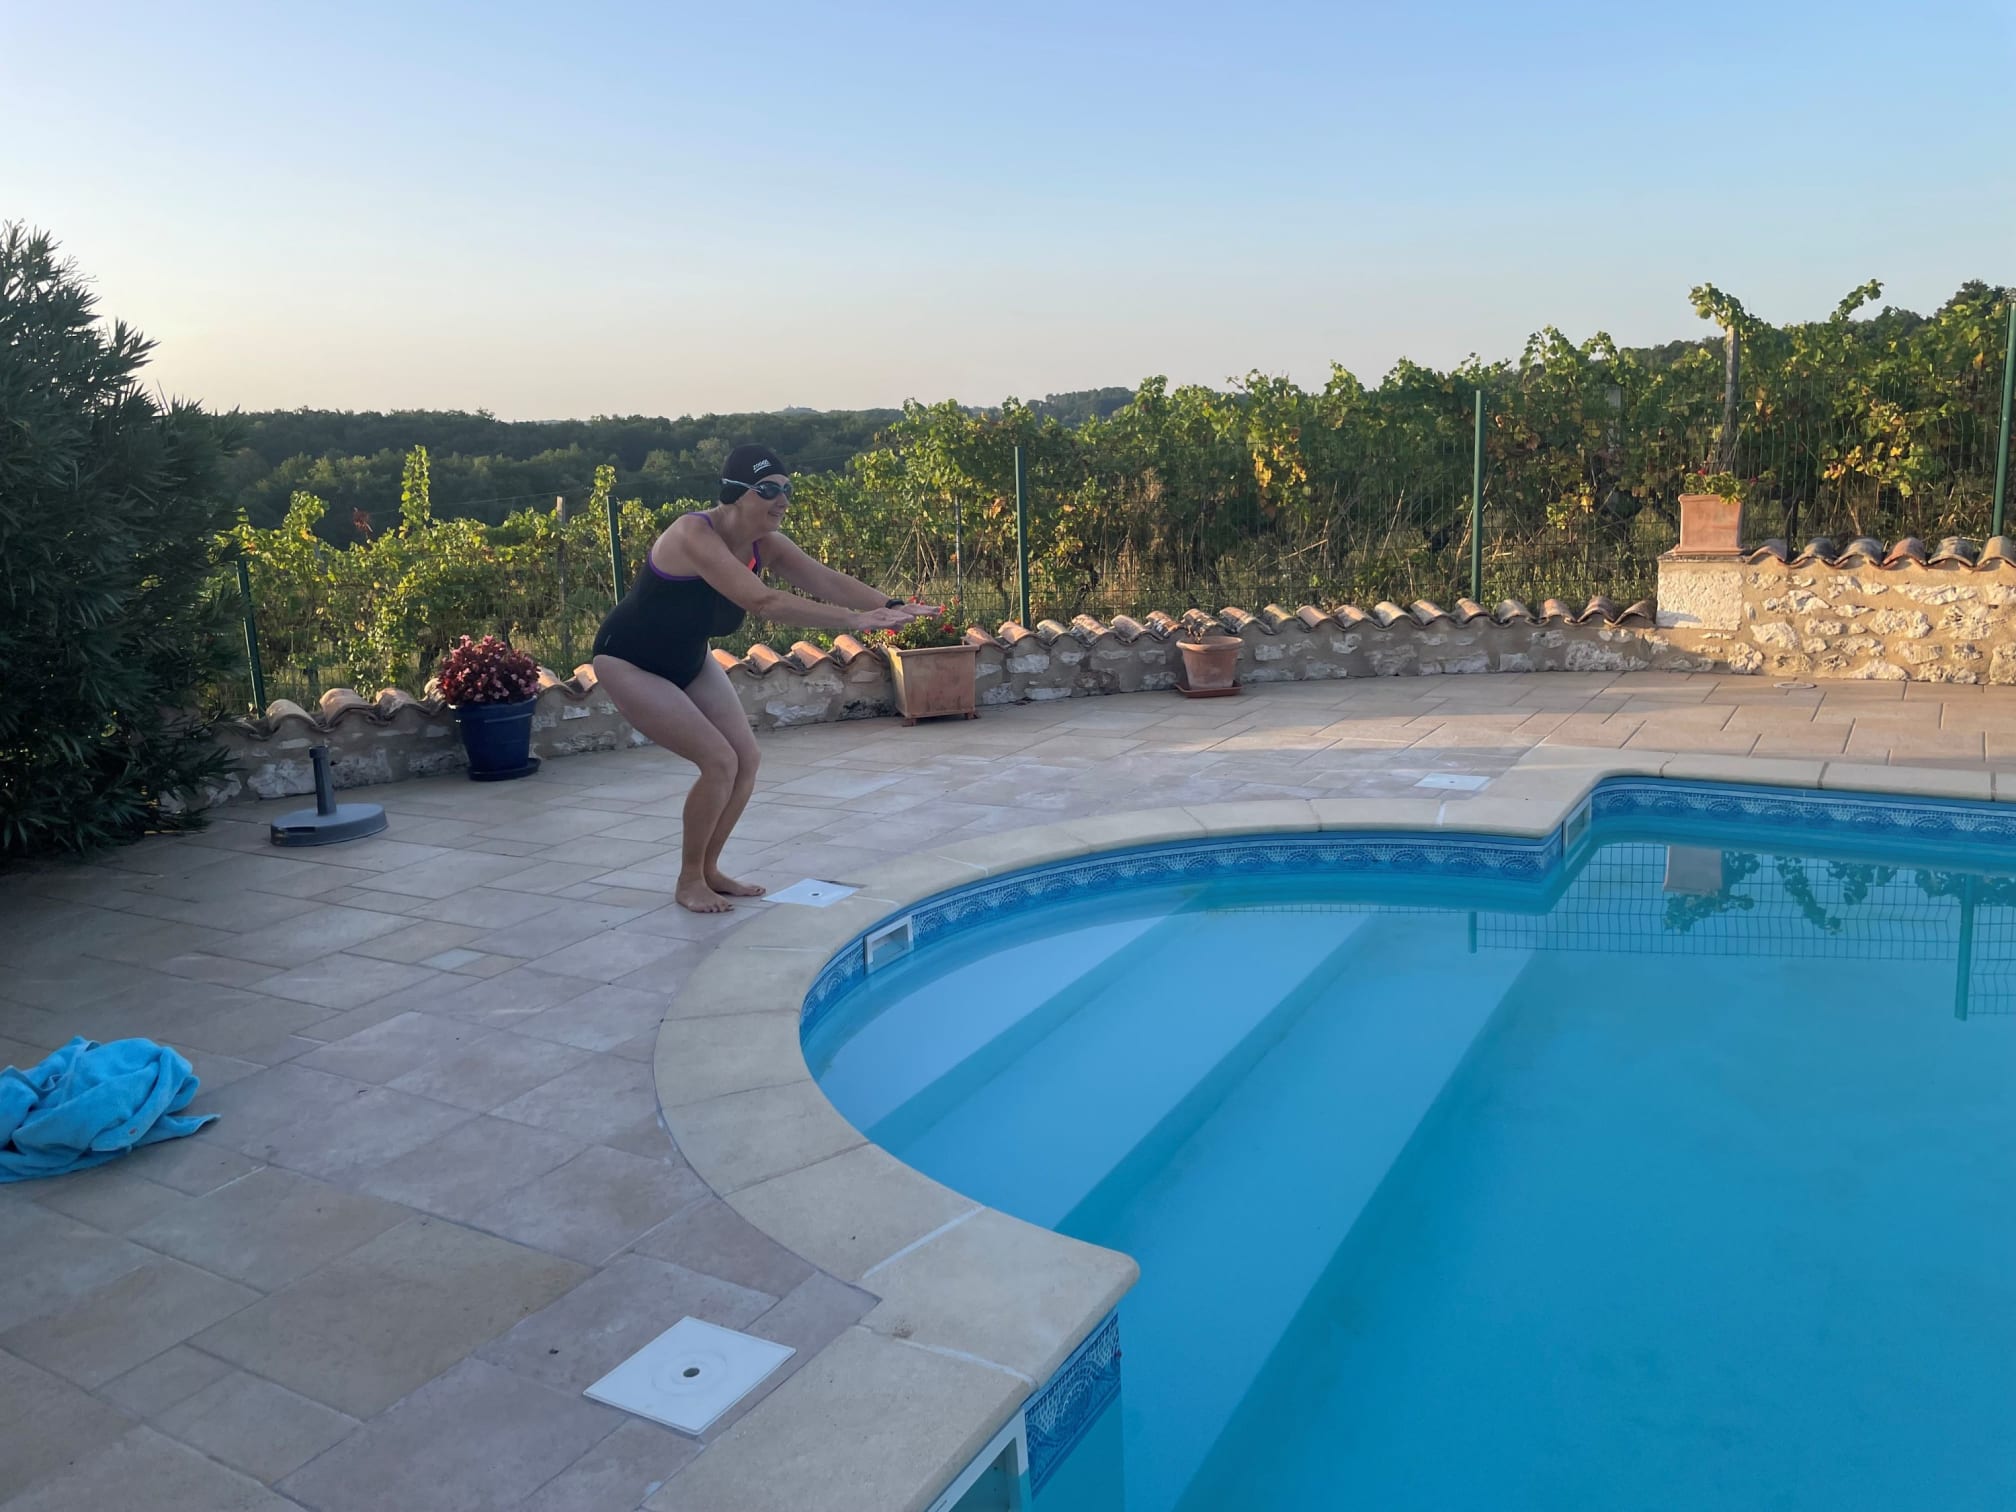 Moira pretending to dive into the swimming pool